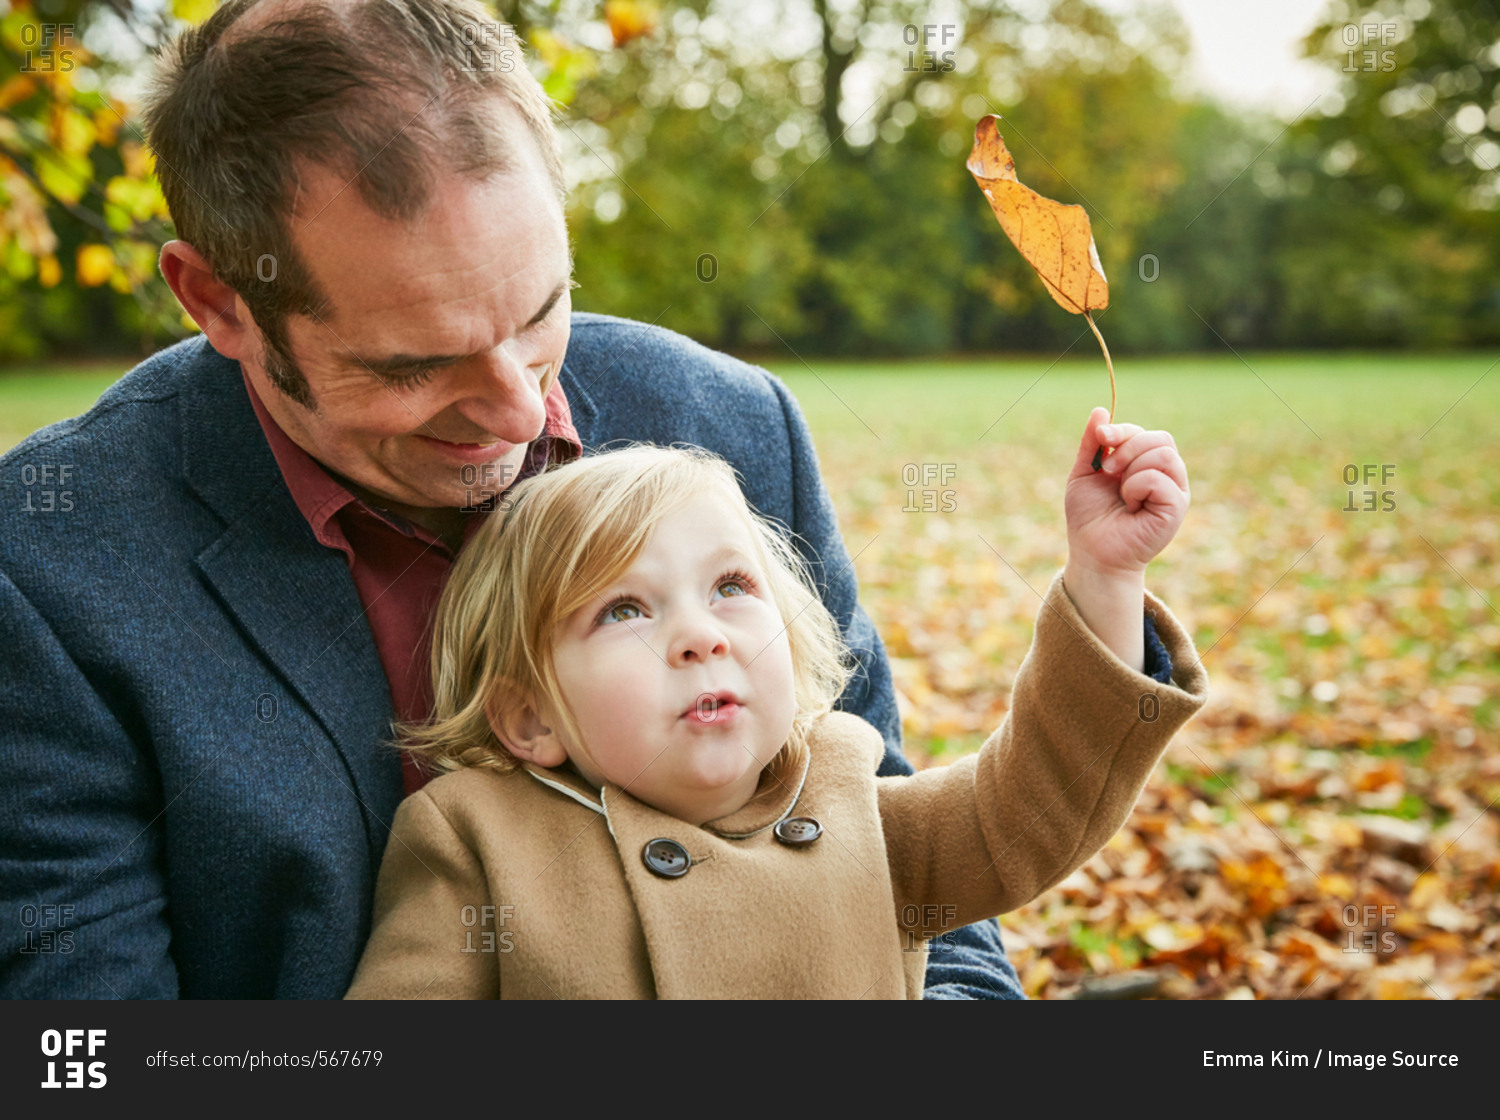 Daughter sitting on father's lap holding autumn leaf